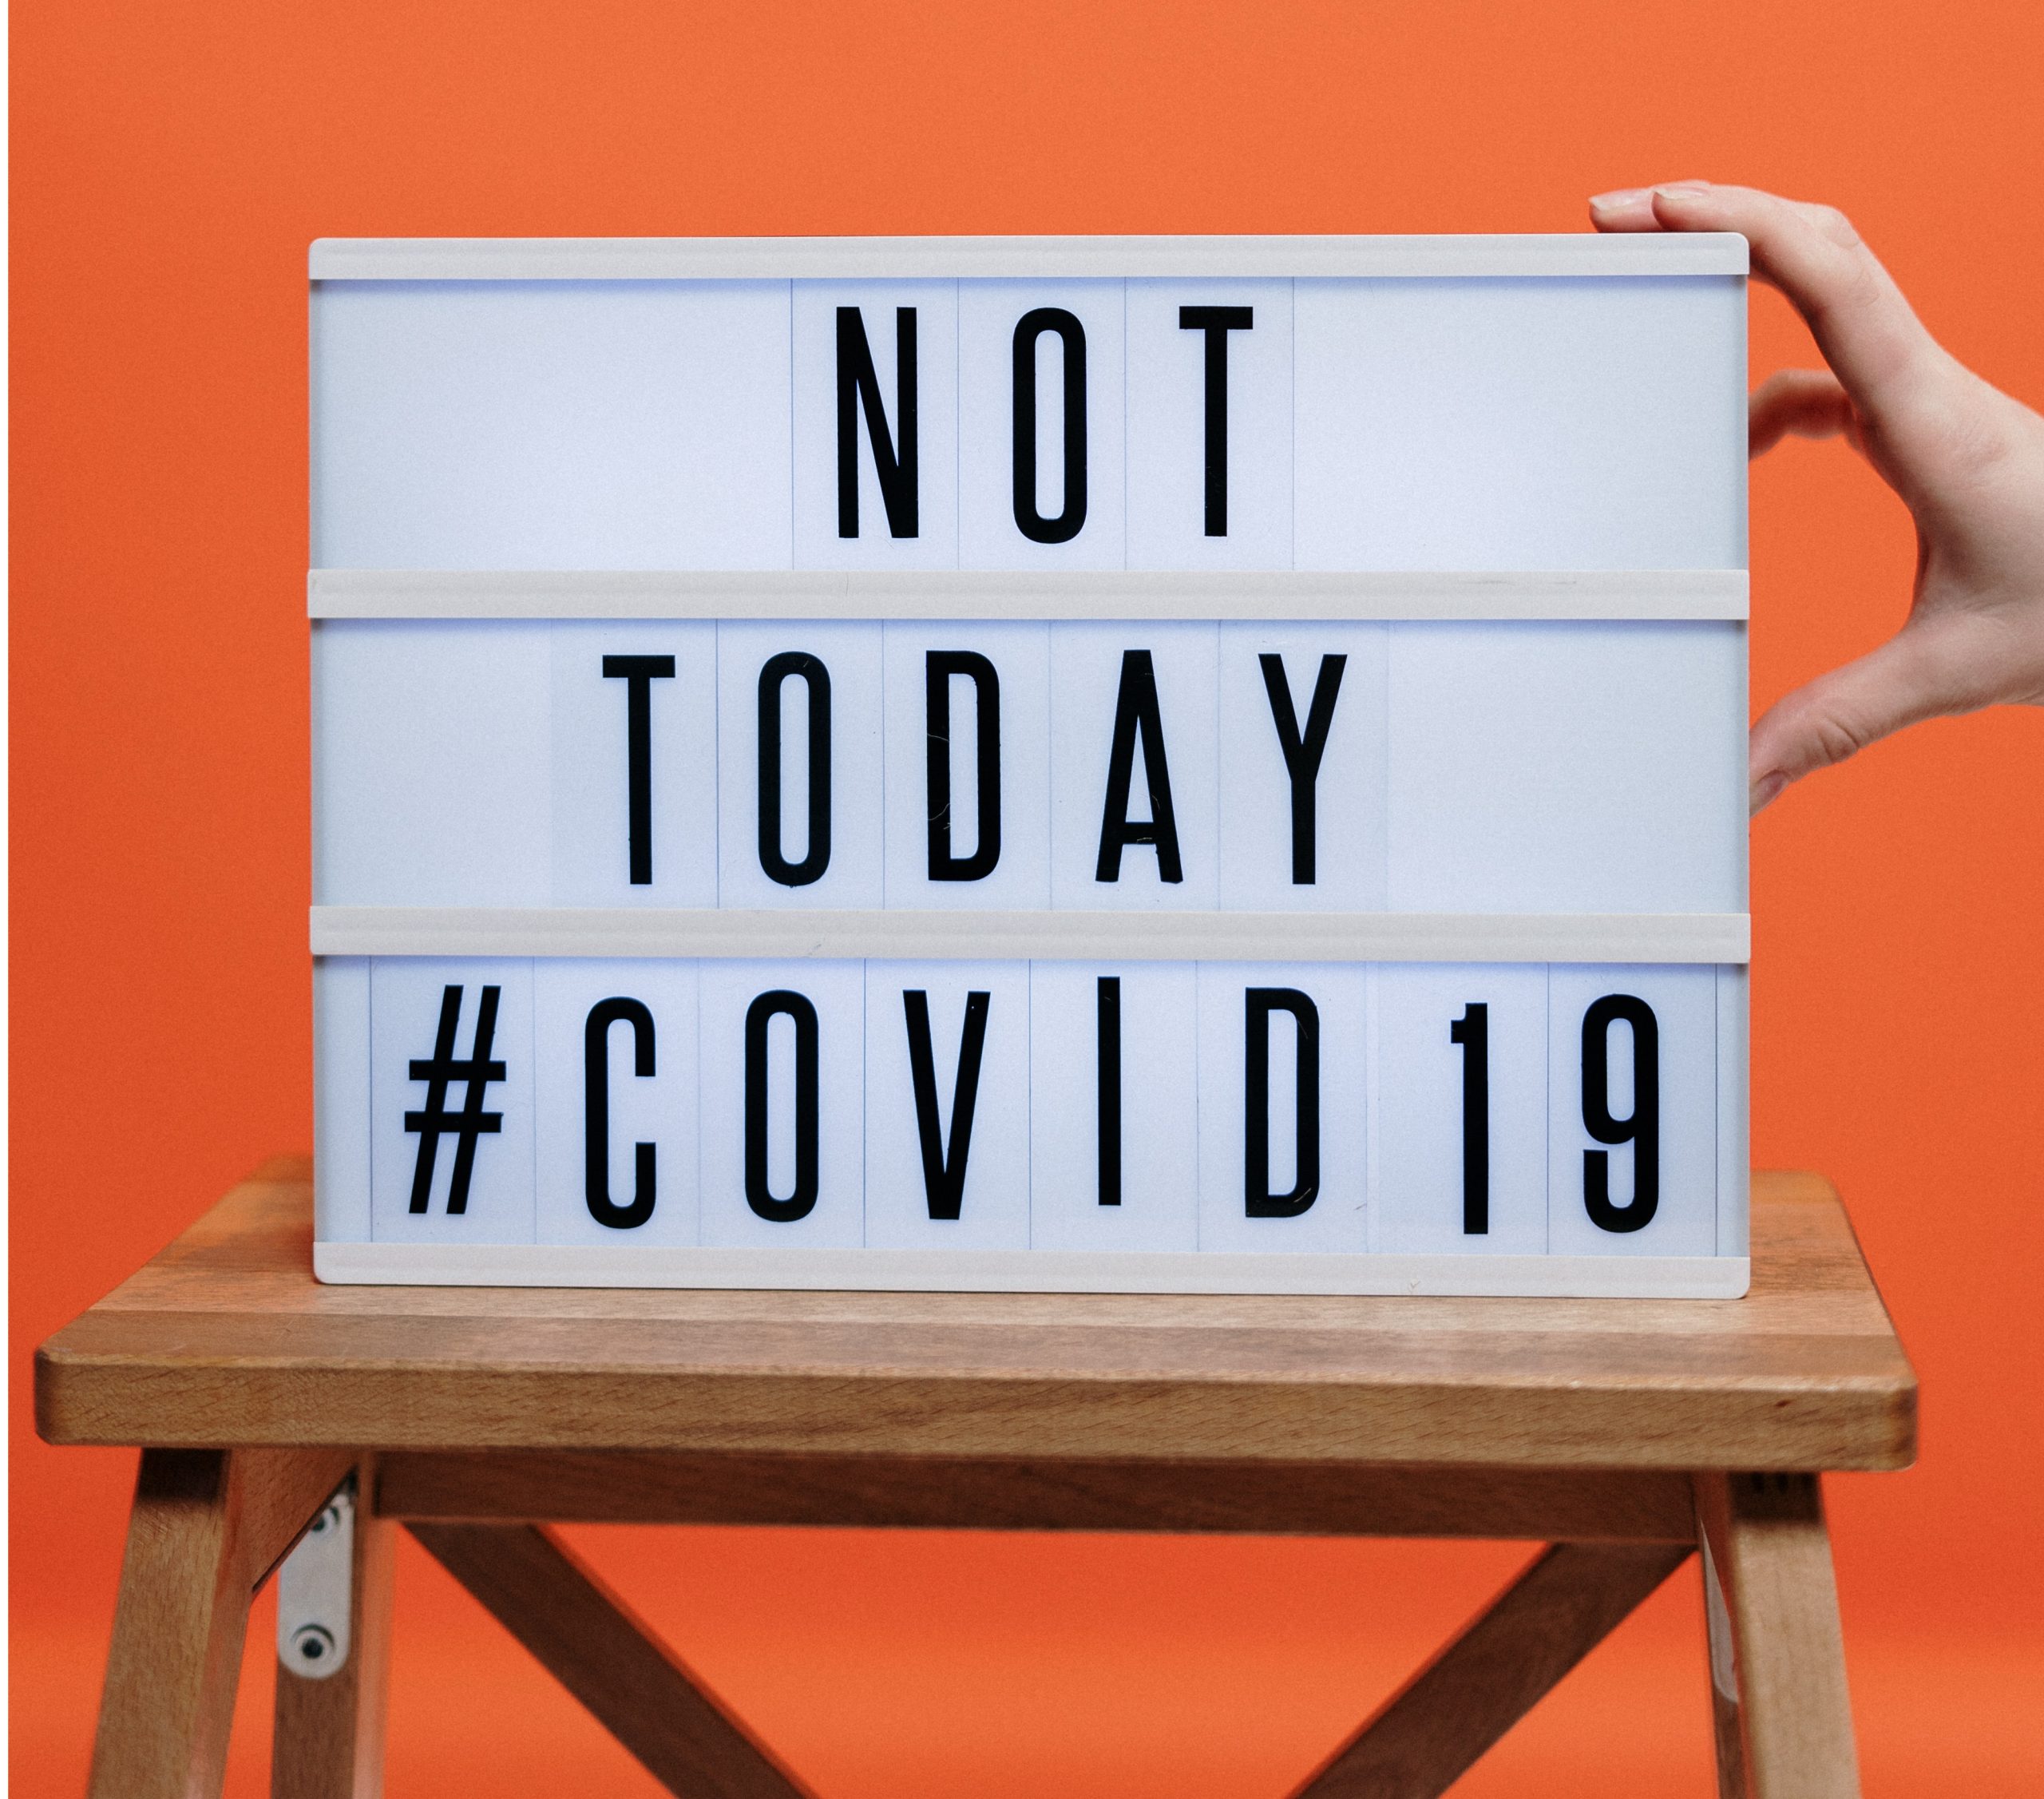 Why UGC Matters During COVID-19 Lockdown